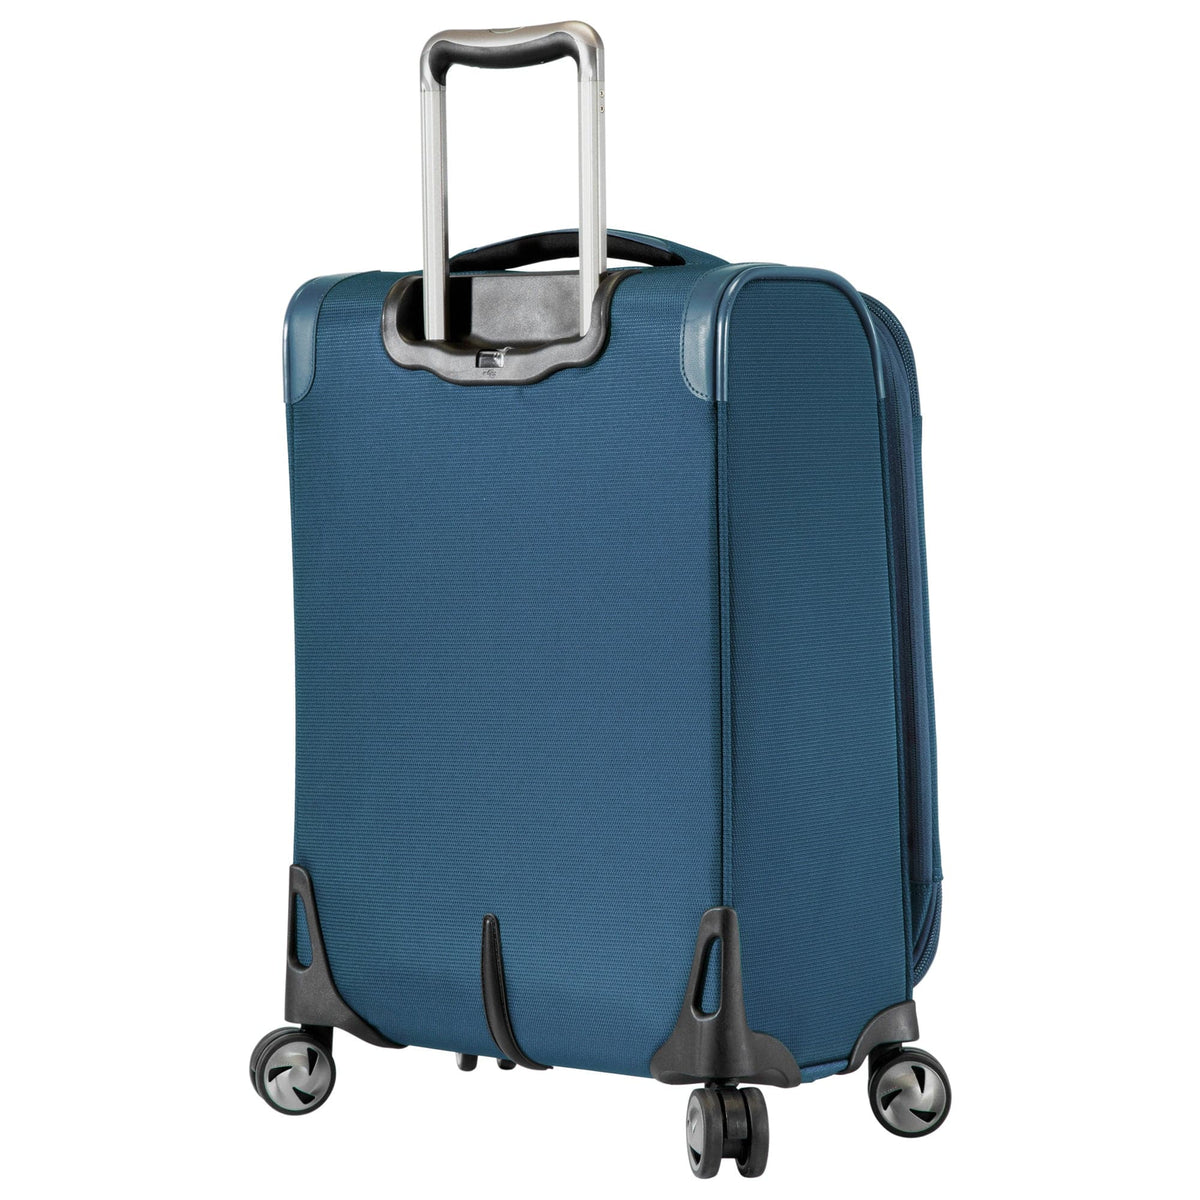 Ricardo Beverly Hills Seahaven 2.0 Softside Carry-On Luggage